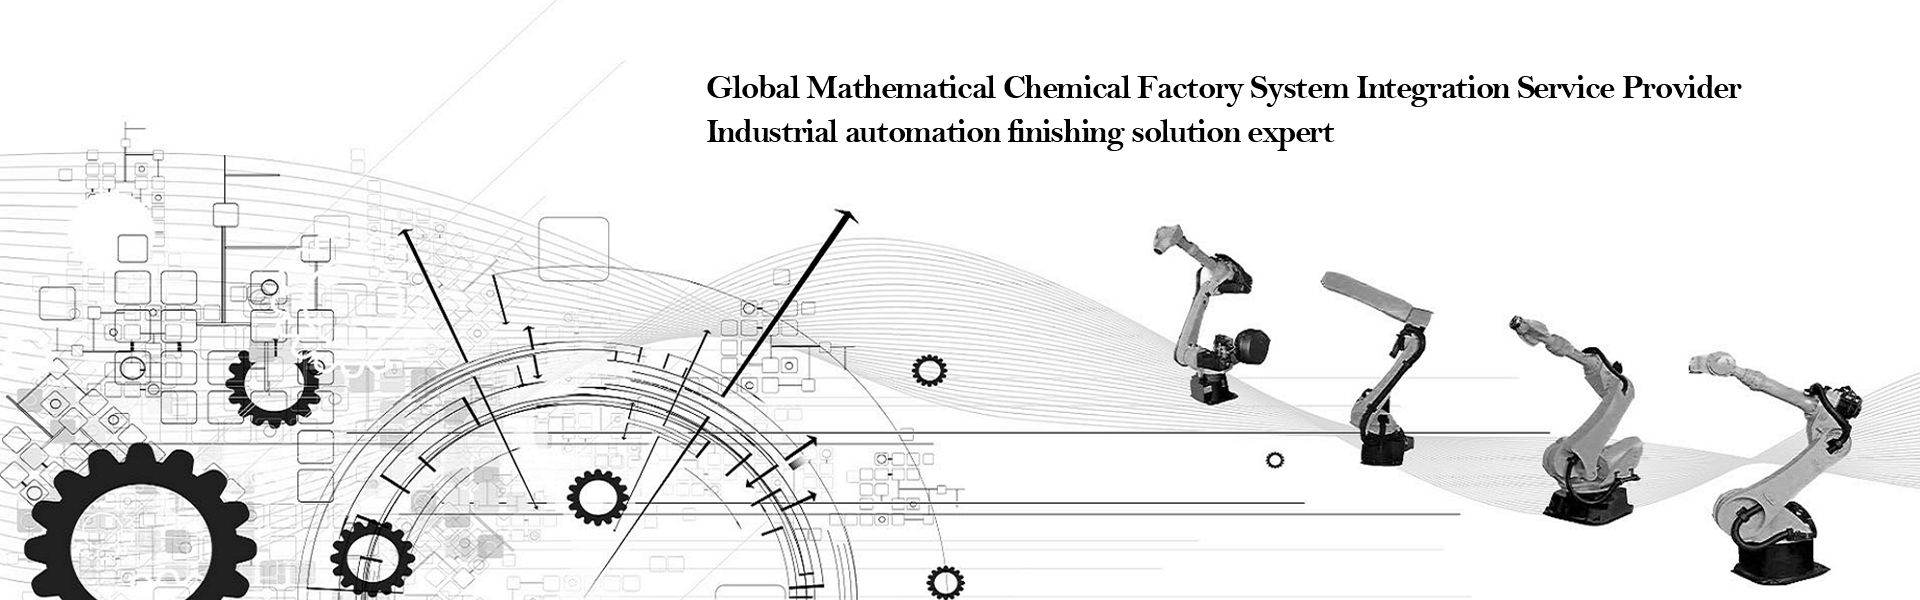 Global Mathematical Chemical Factory System Integration Service Provider